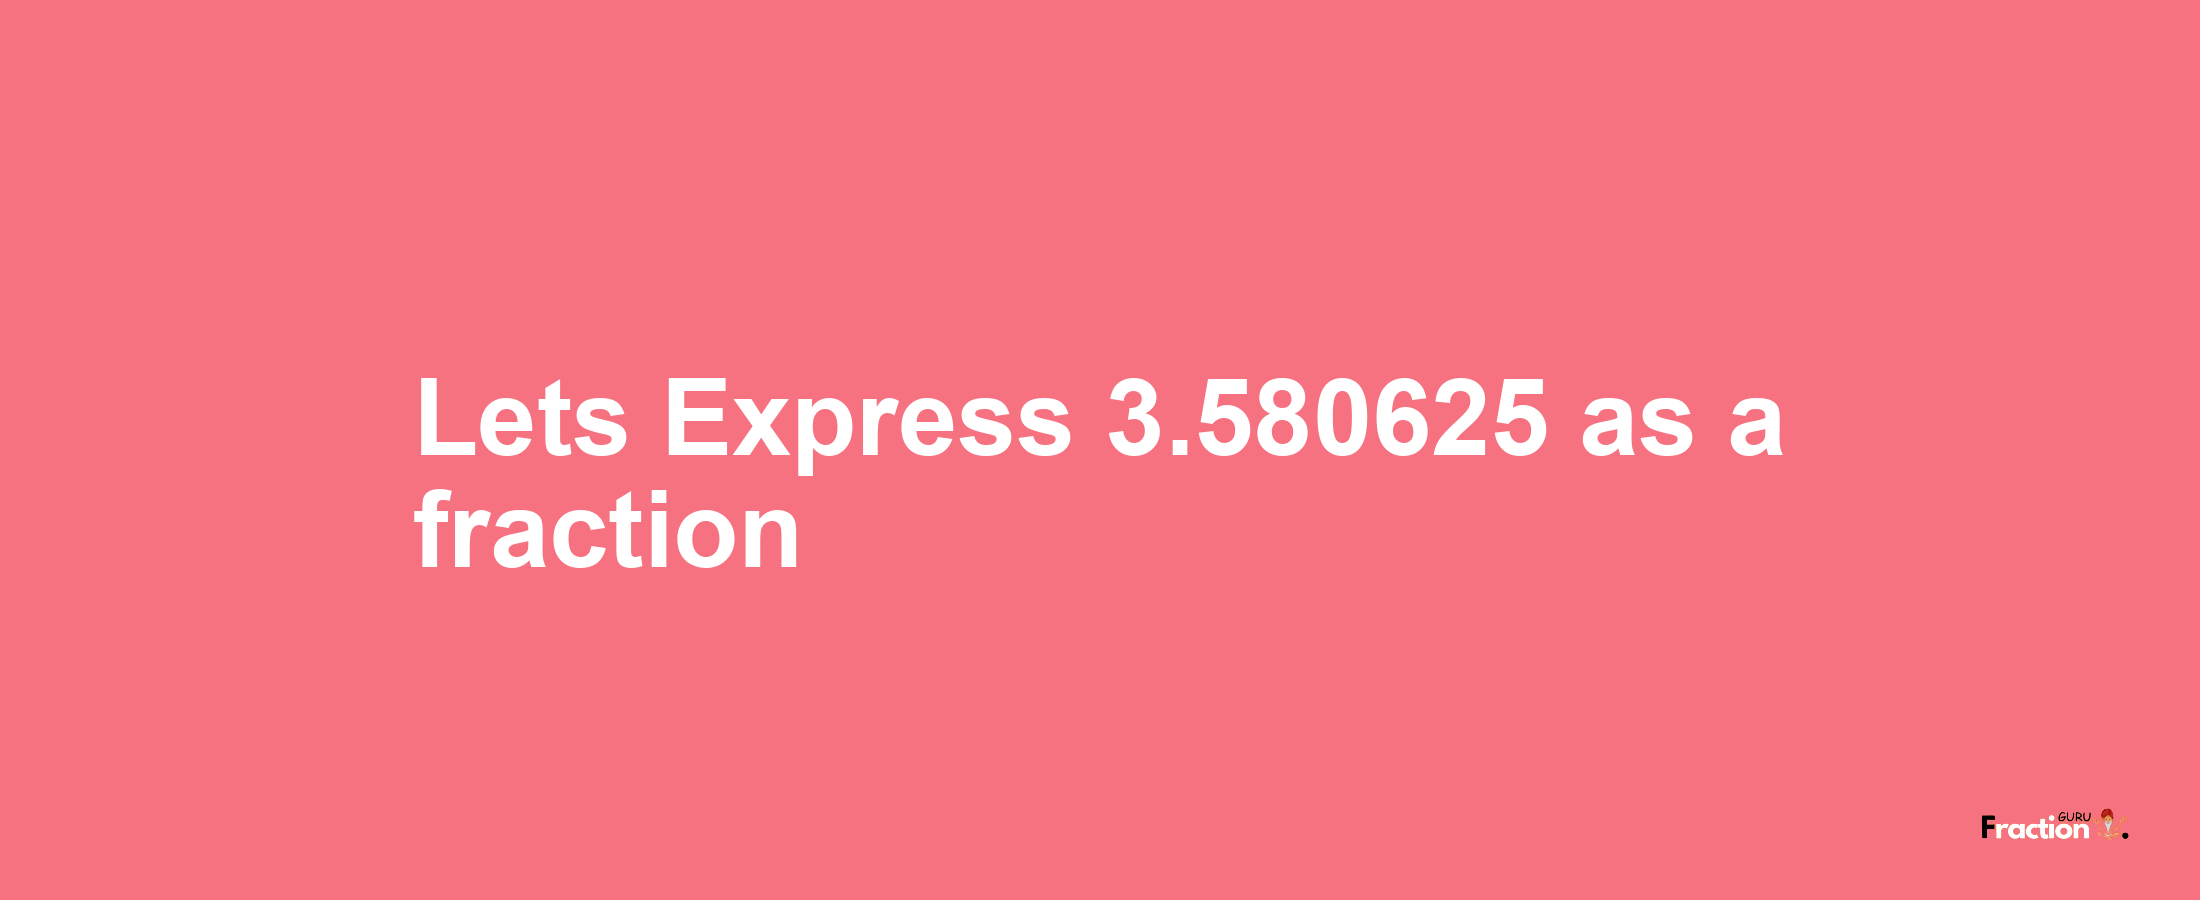 Lets Express 3.580625 as afraction